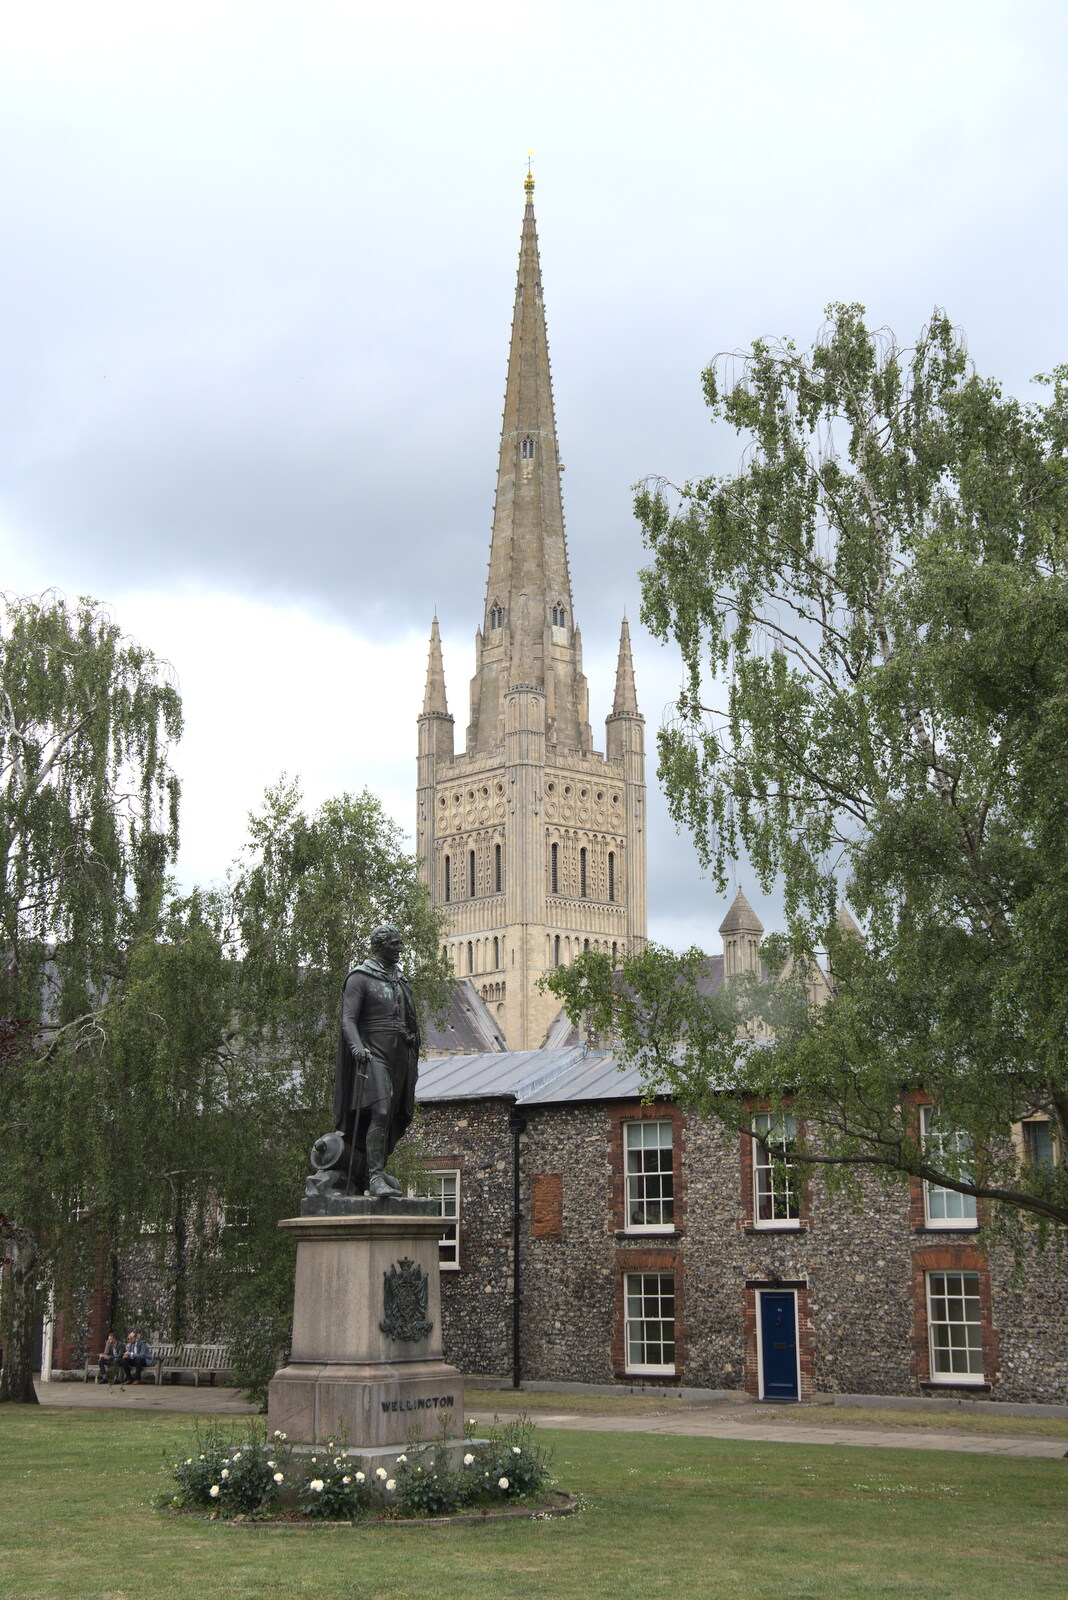 A nice view of the Catherdral spire from Discovering the Hidden City: Norwich, Norfolk - 23rd May 2022